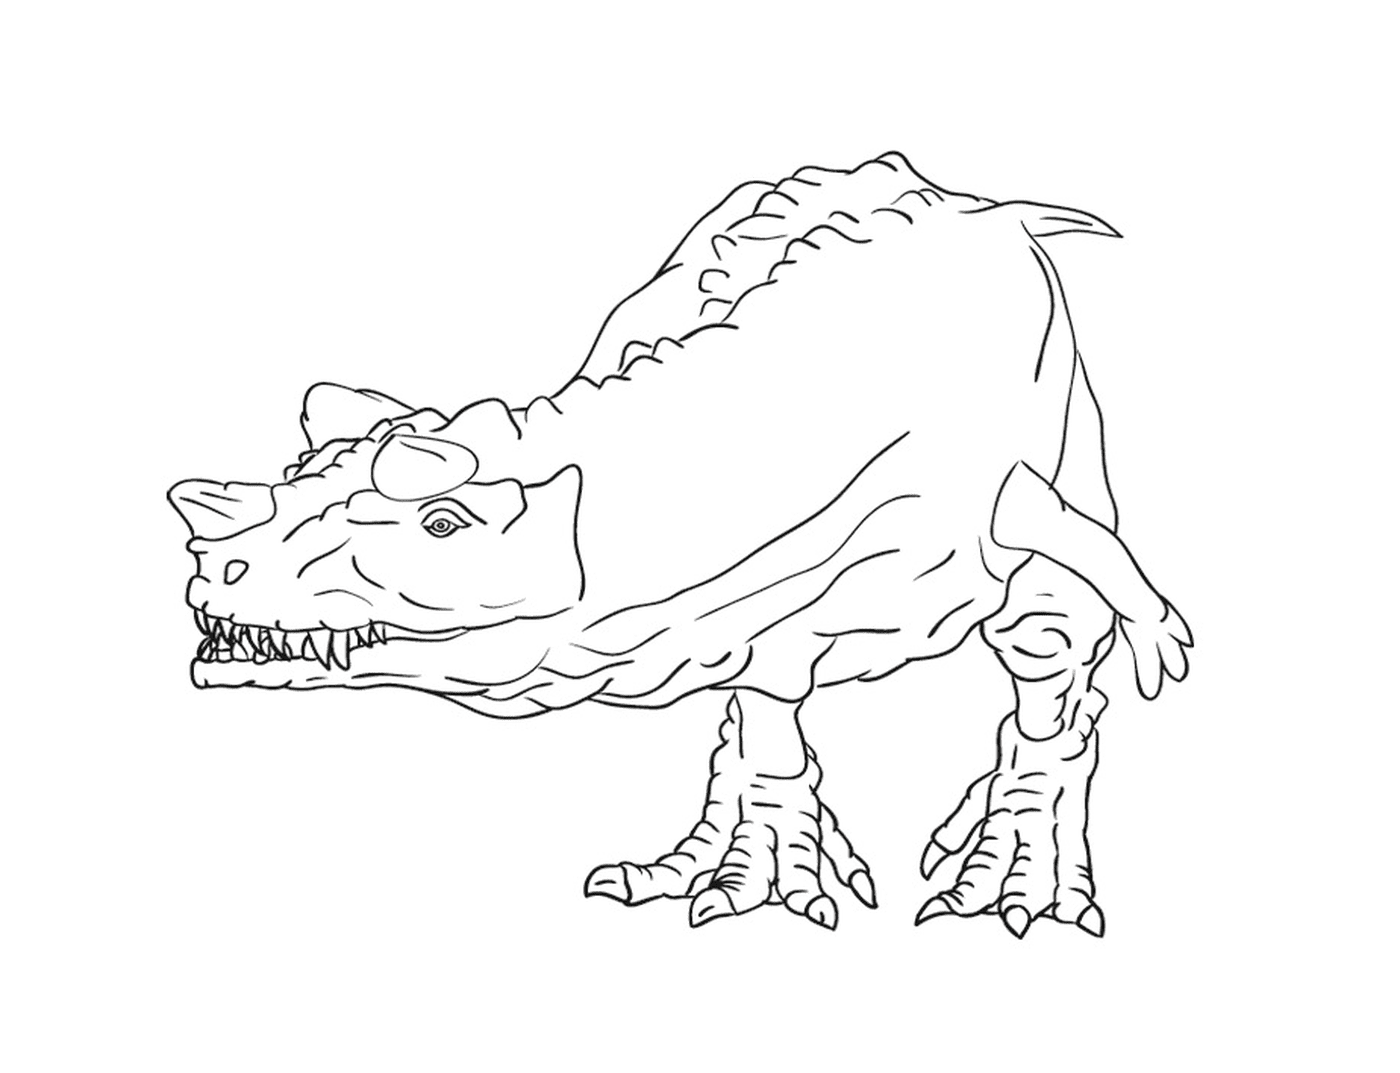  Drawing of a neat and detailed dinosaur 